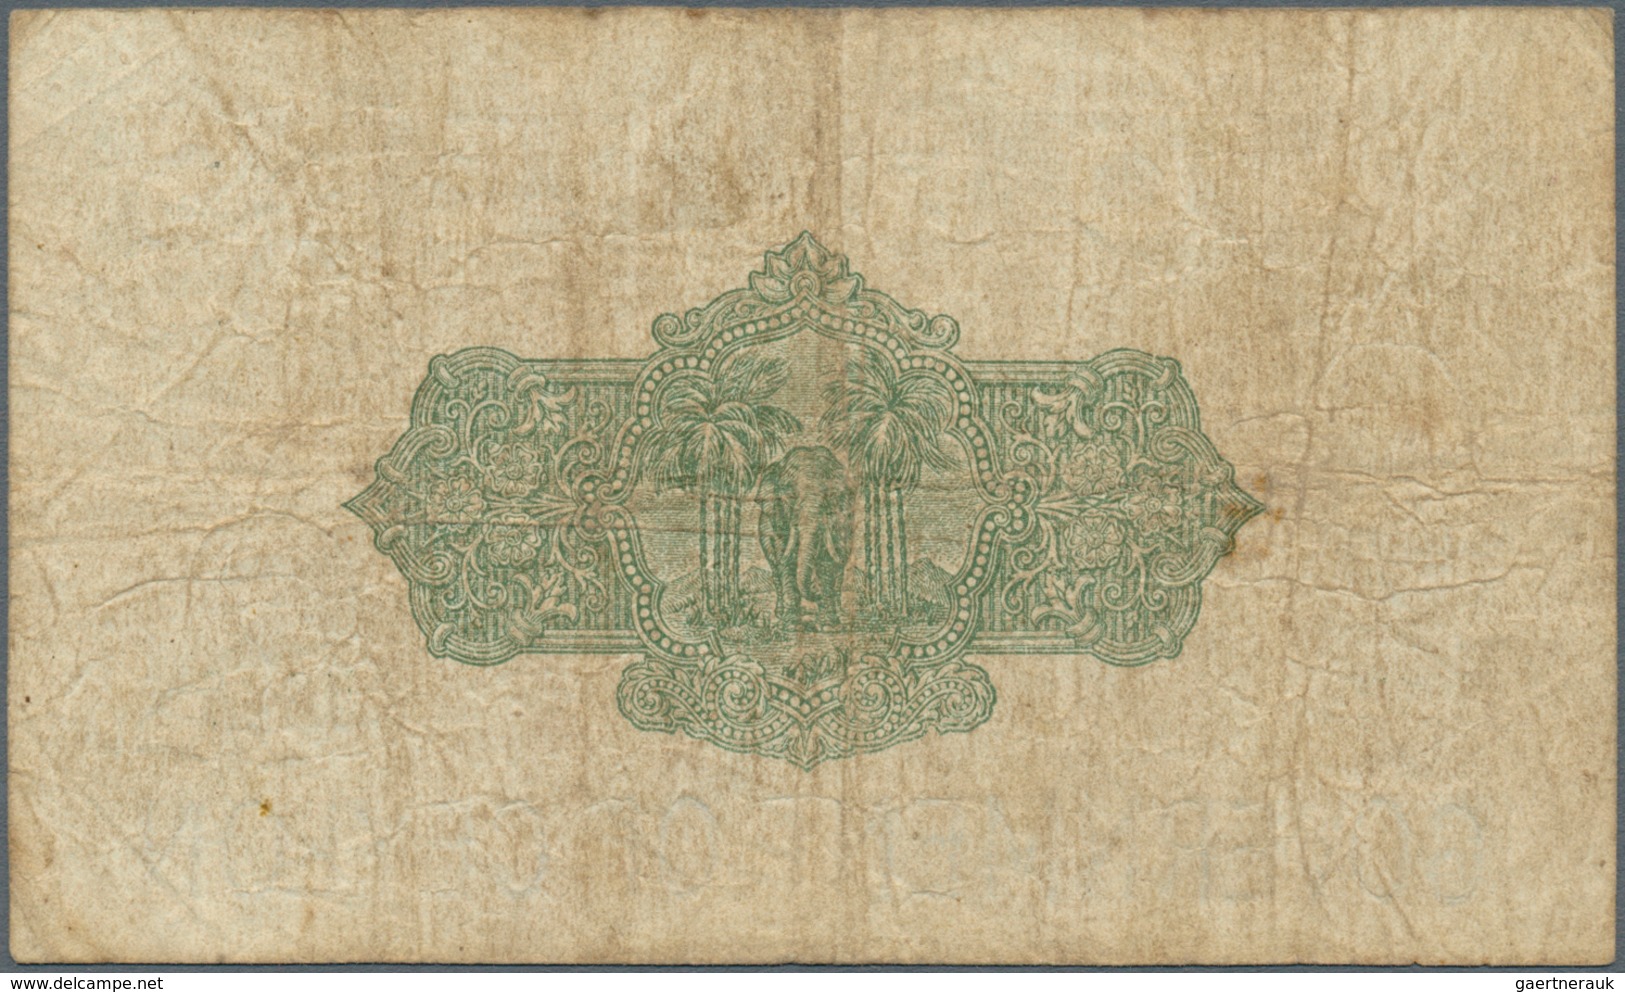 01272 Ceylon: 2 Rupees 1939 P. 21, Used With Several Folds And Creases, Light Stain In Paper, No Holes Or - Sri Lanka